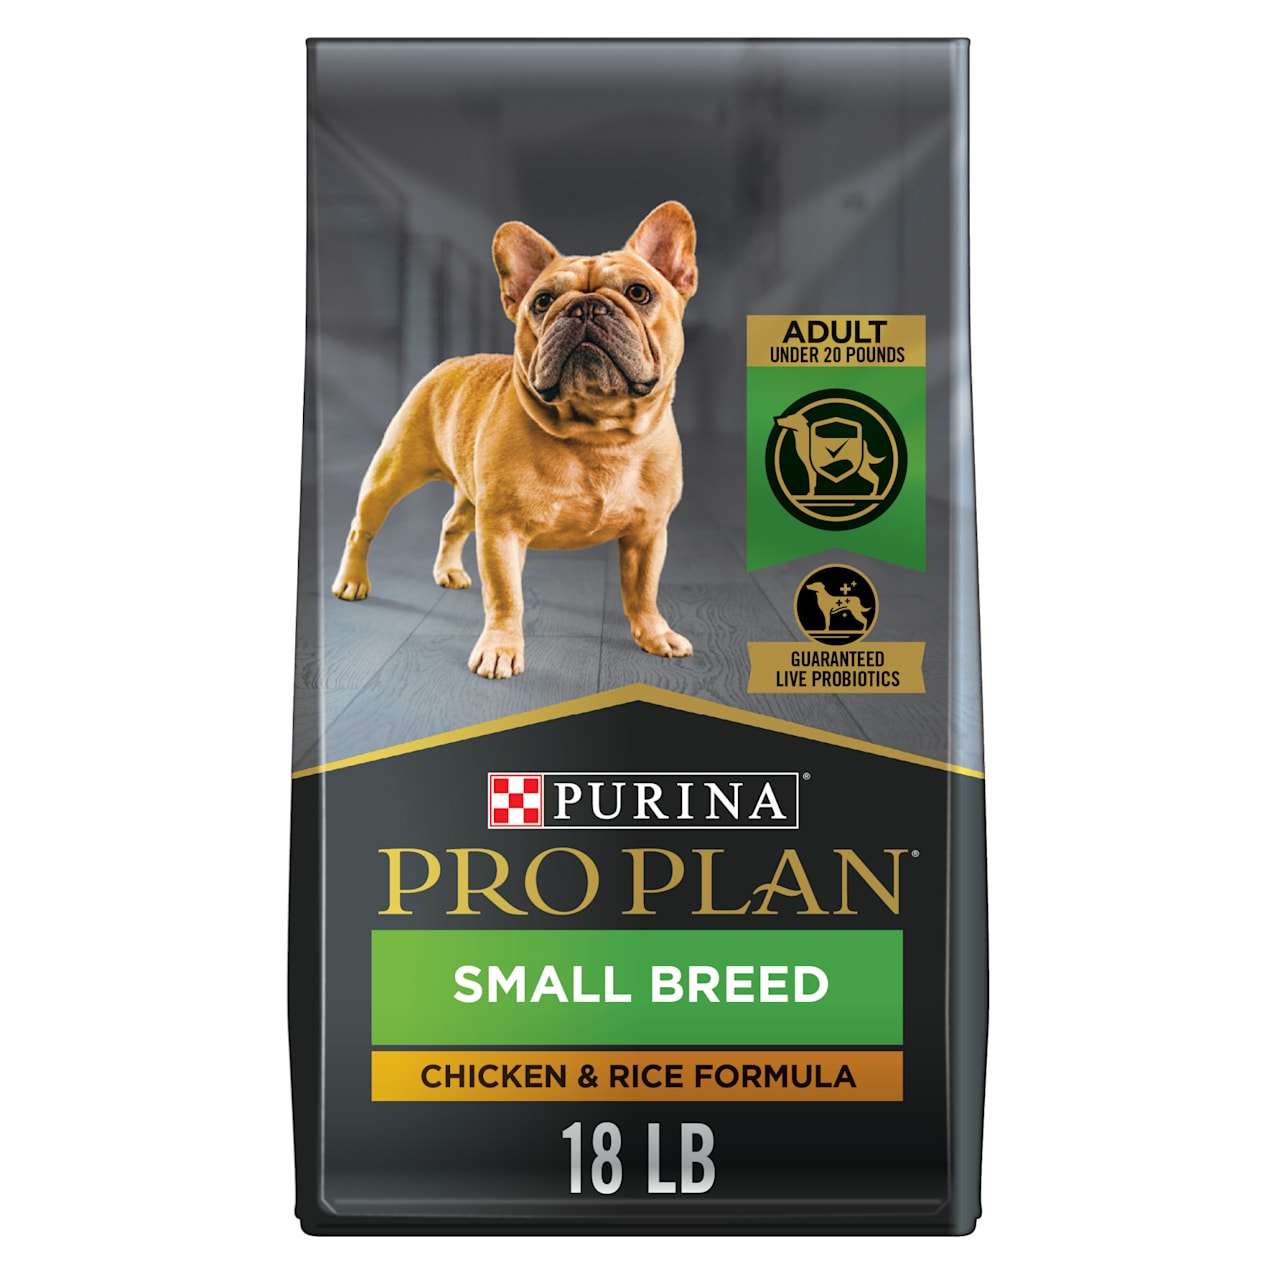 Purina Pro Plan High Calorie and Protein Small Breed Chicken & Rice